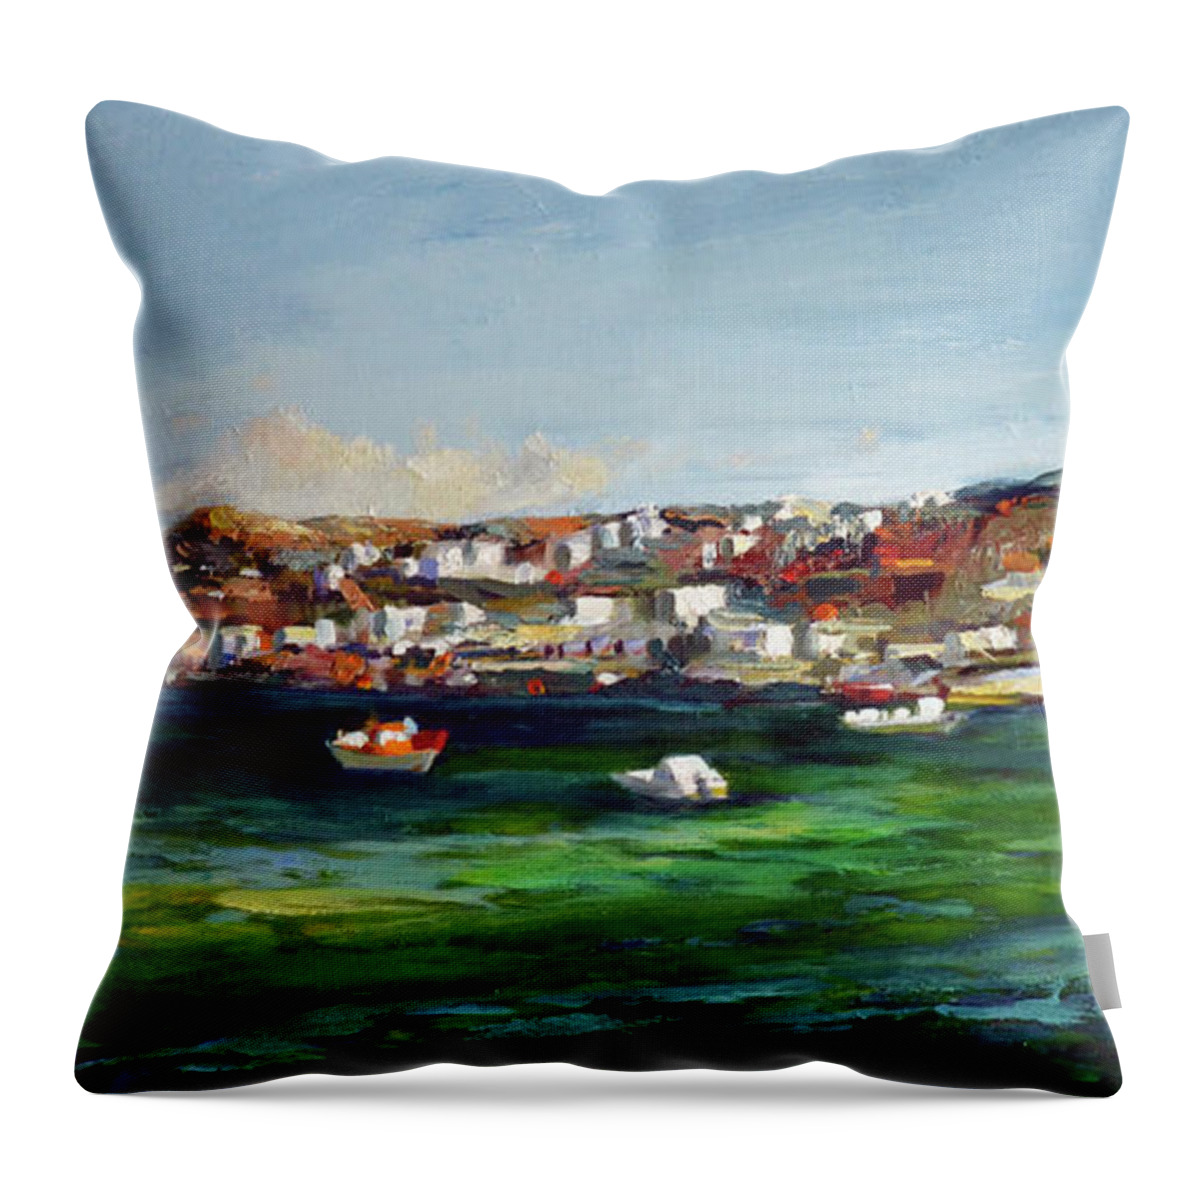  Throw Pillow featuring the painting Mykonos Harbour by Josef Kelly